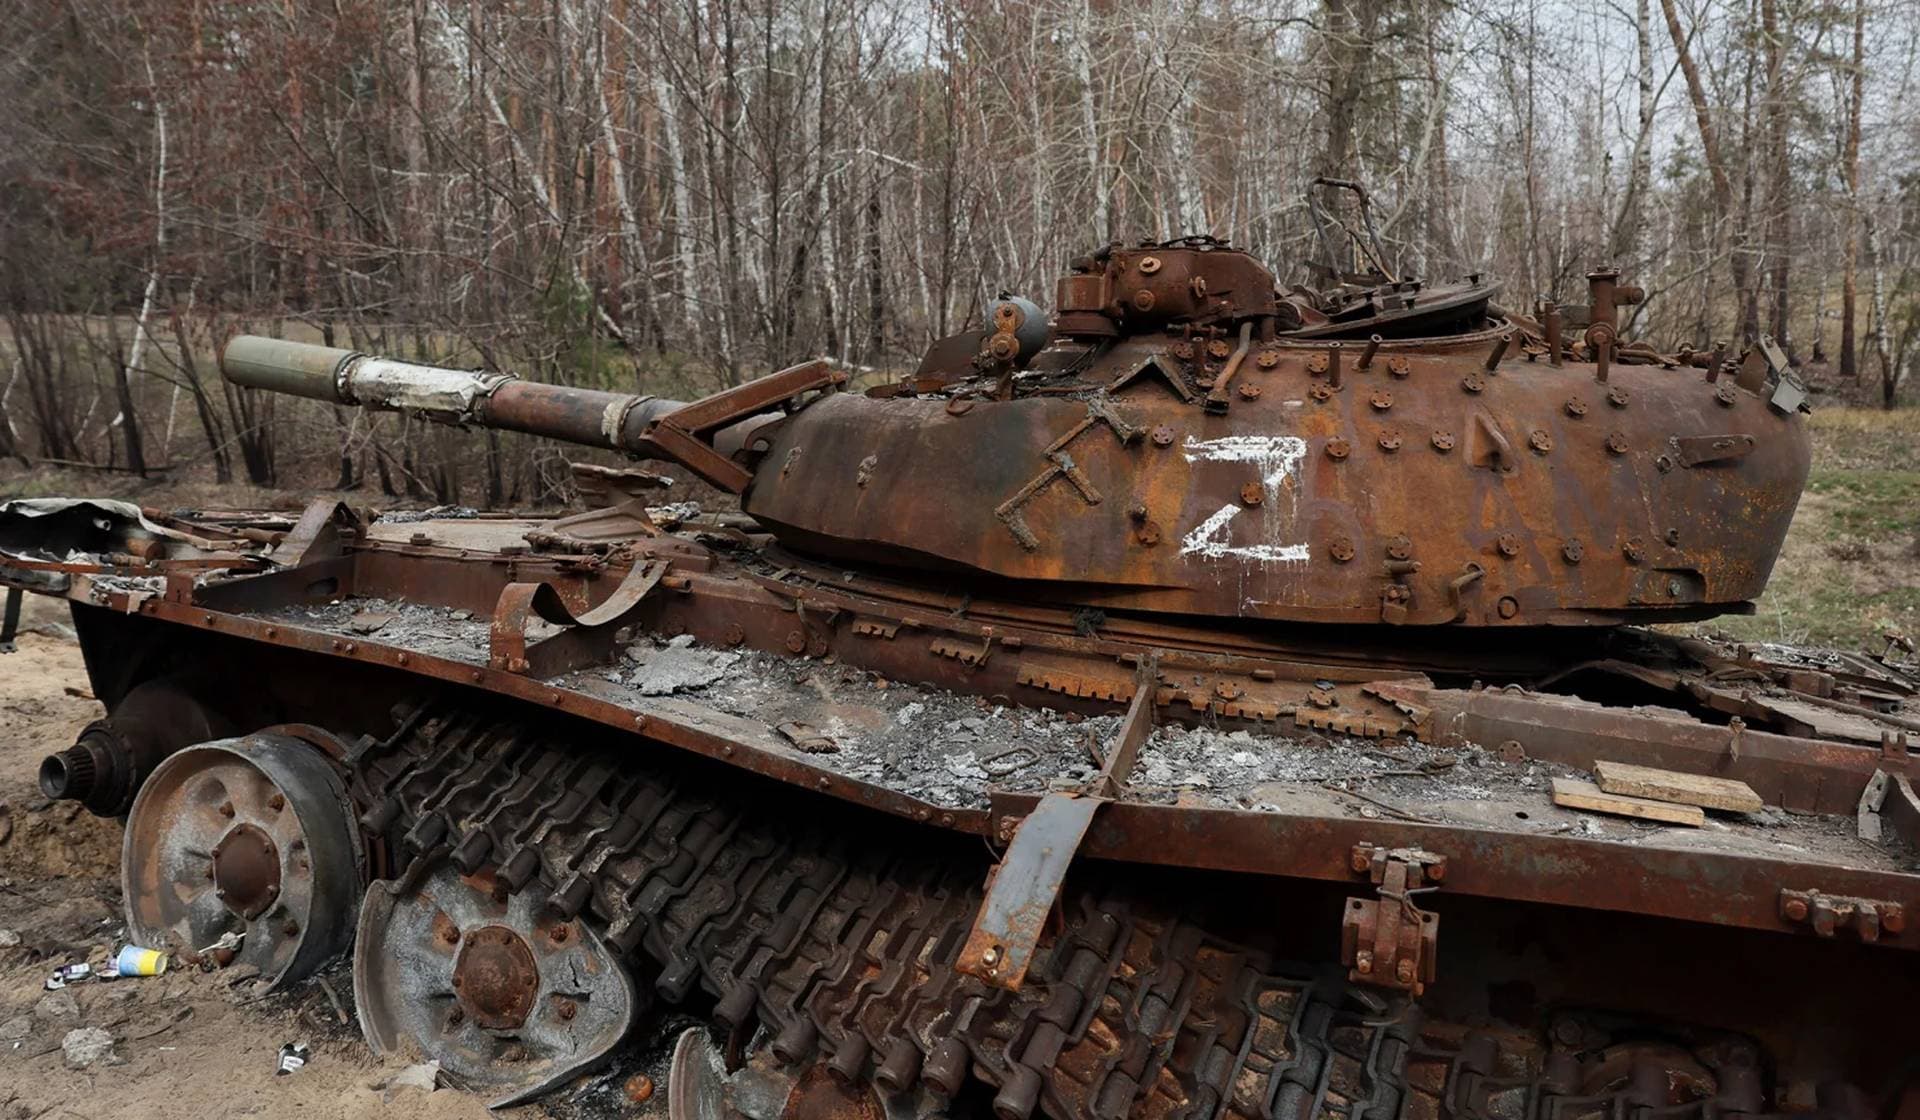 A destroyed Russian tank remains on the side of the road near the frontline town of Kreminna